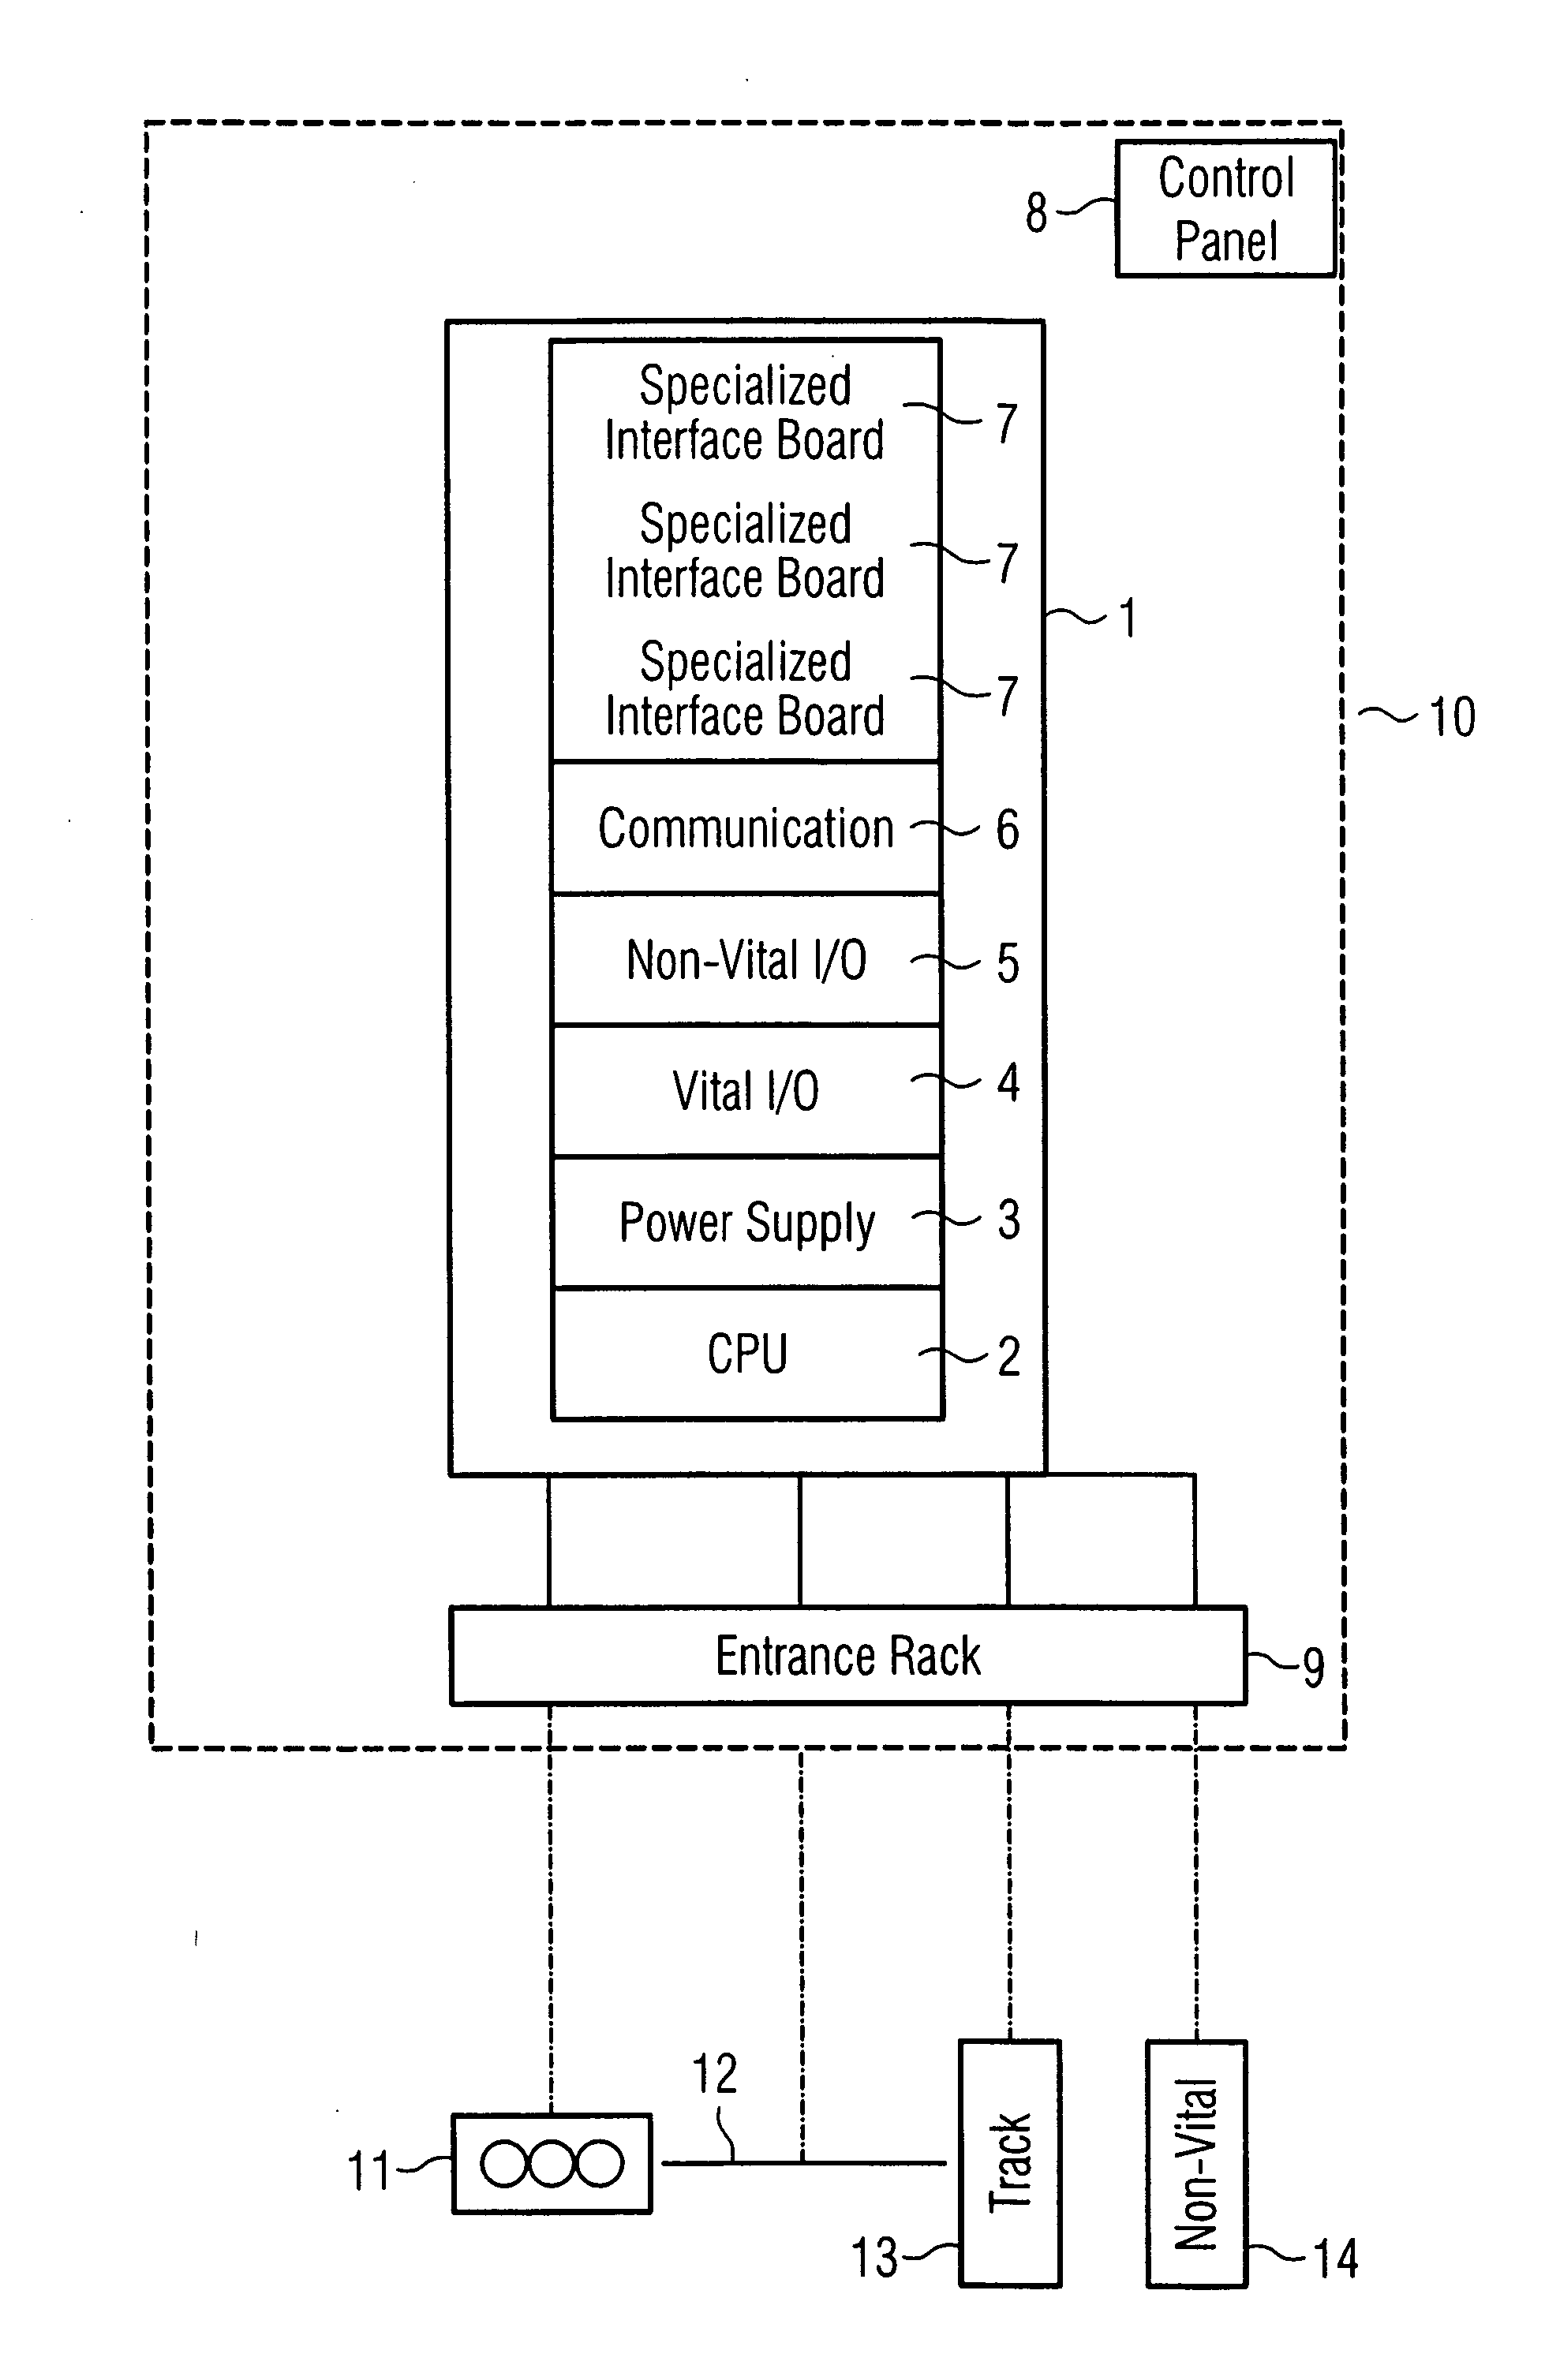 System architecture for controlling and monitoring components of a railroad safety installation